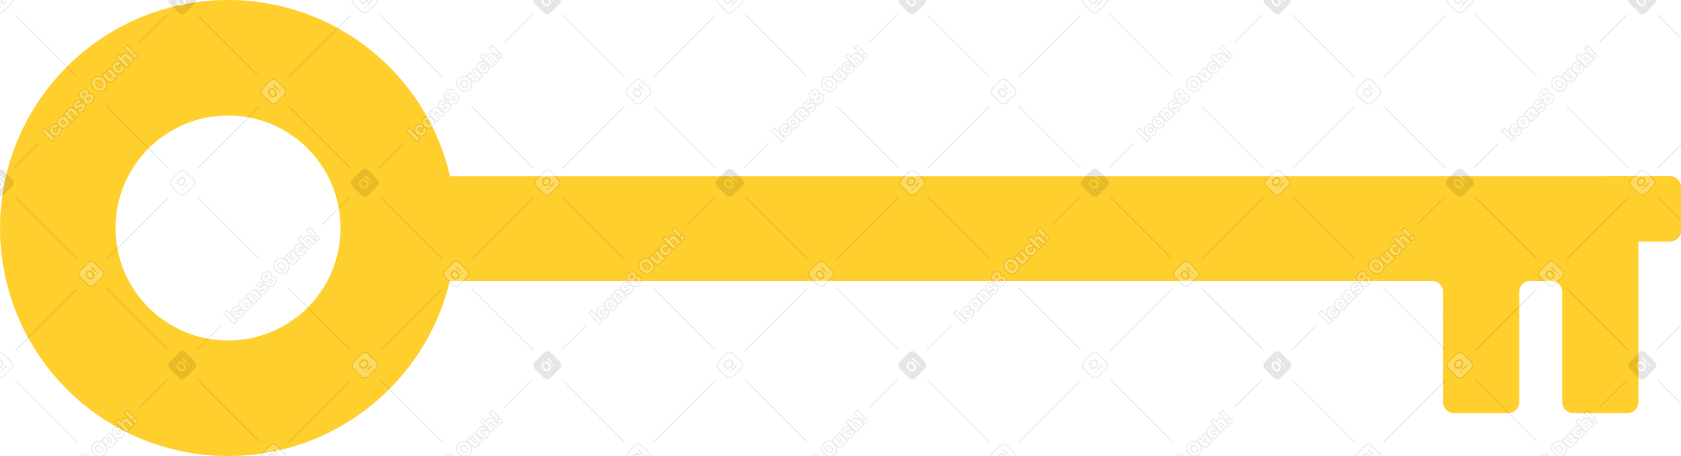 yellow big key Illustration in PNG, SVG